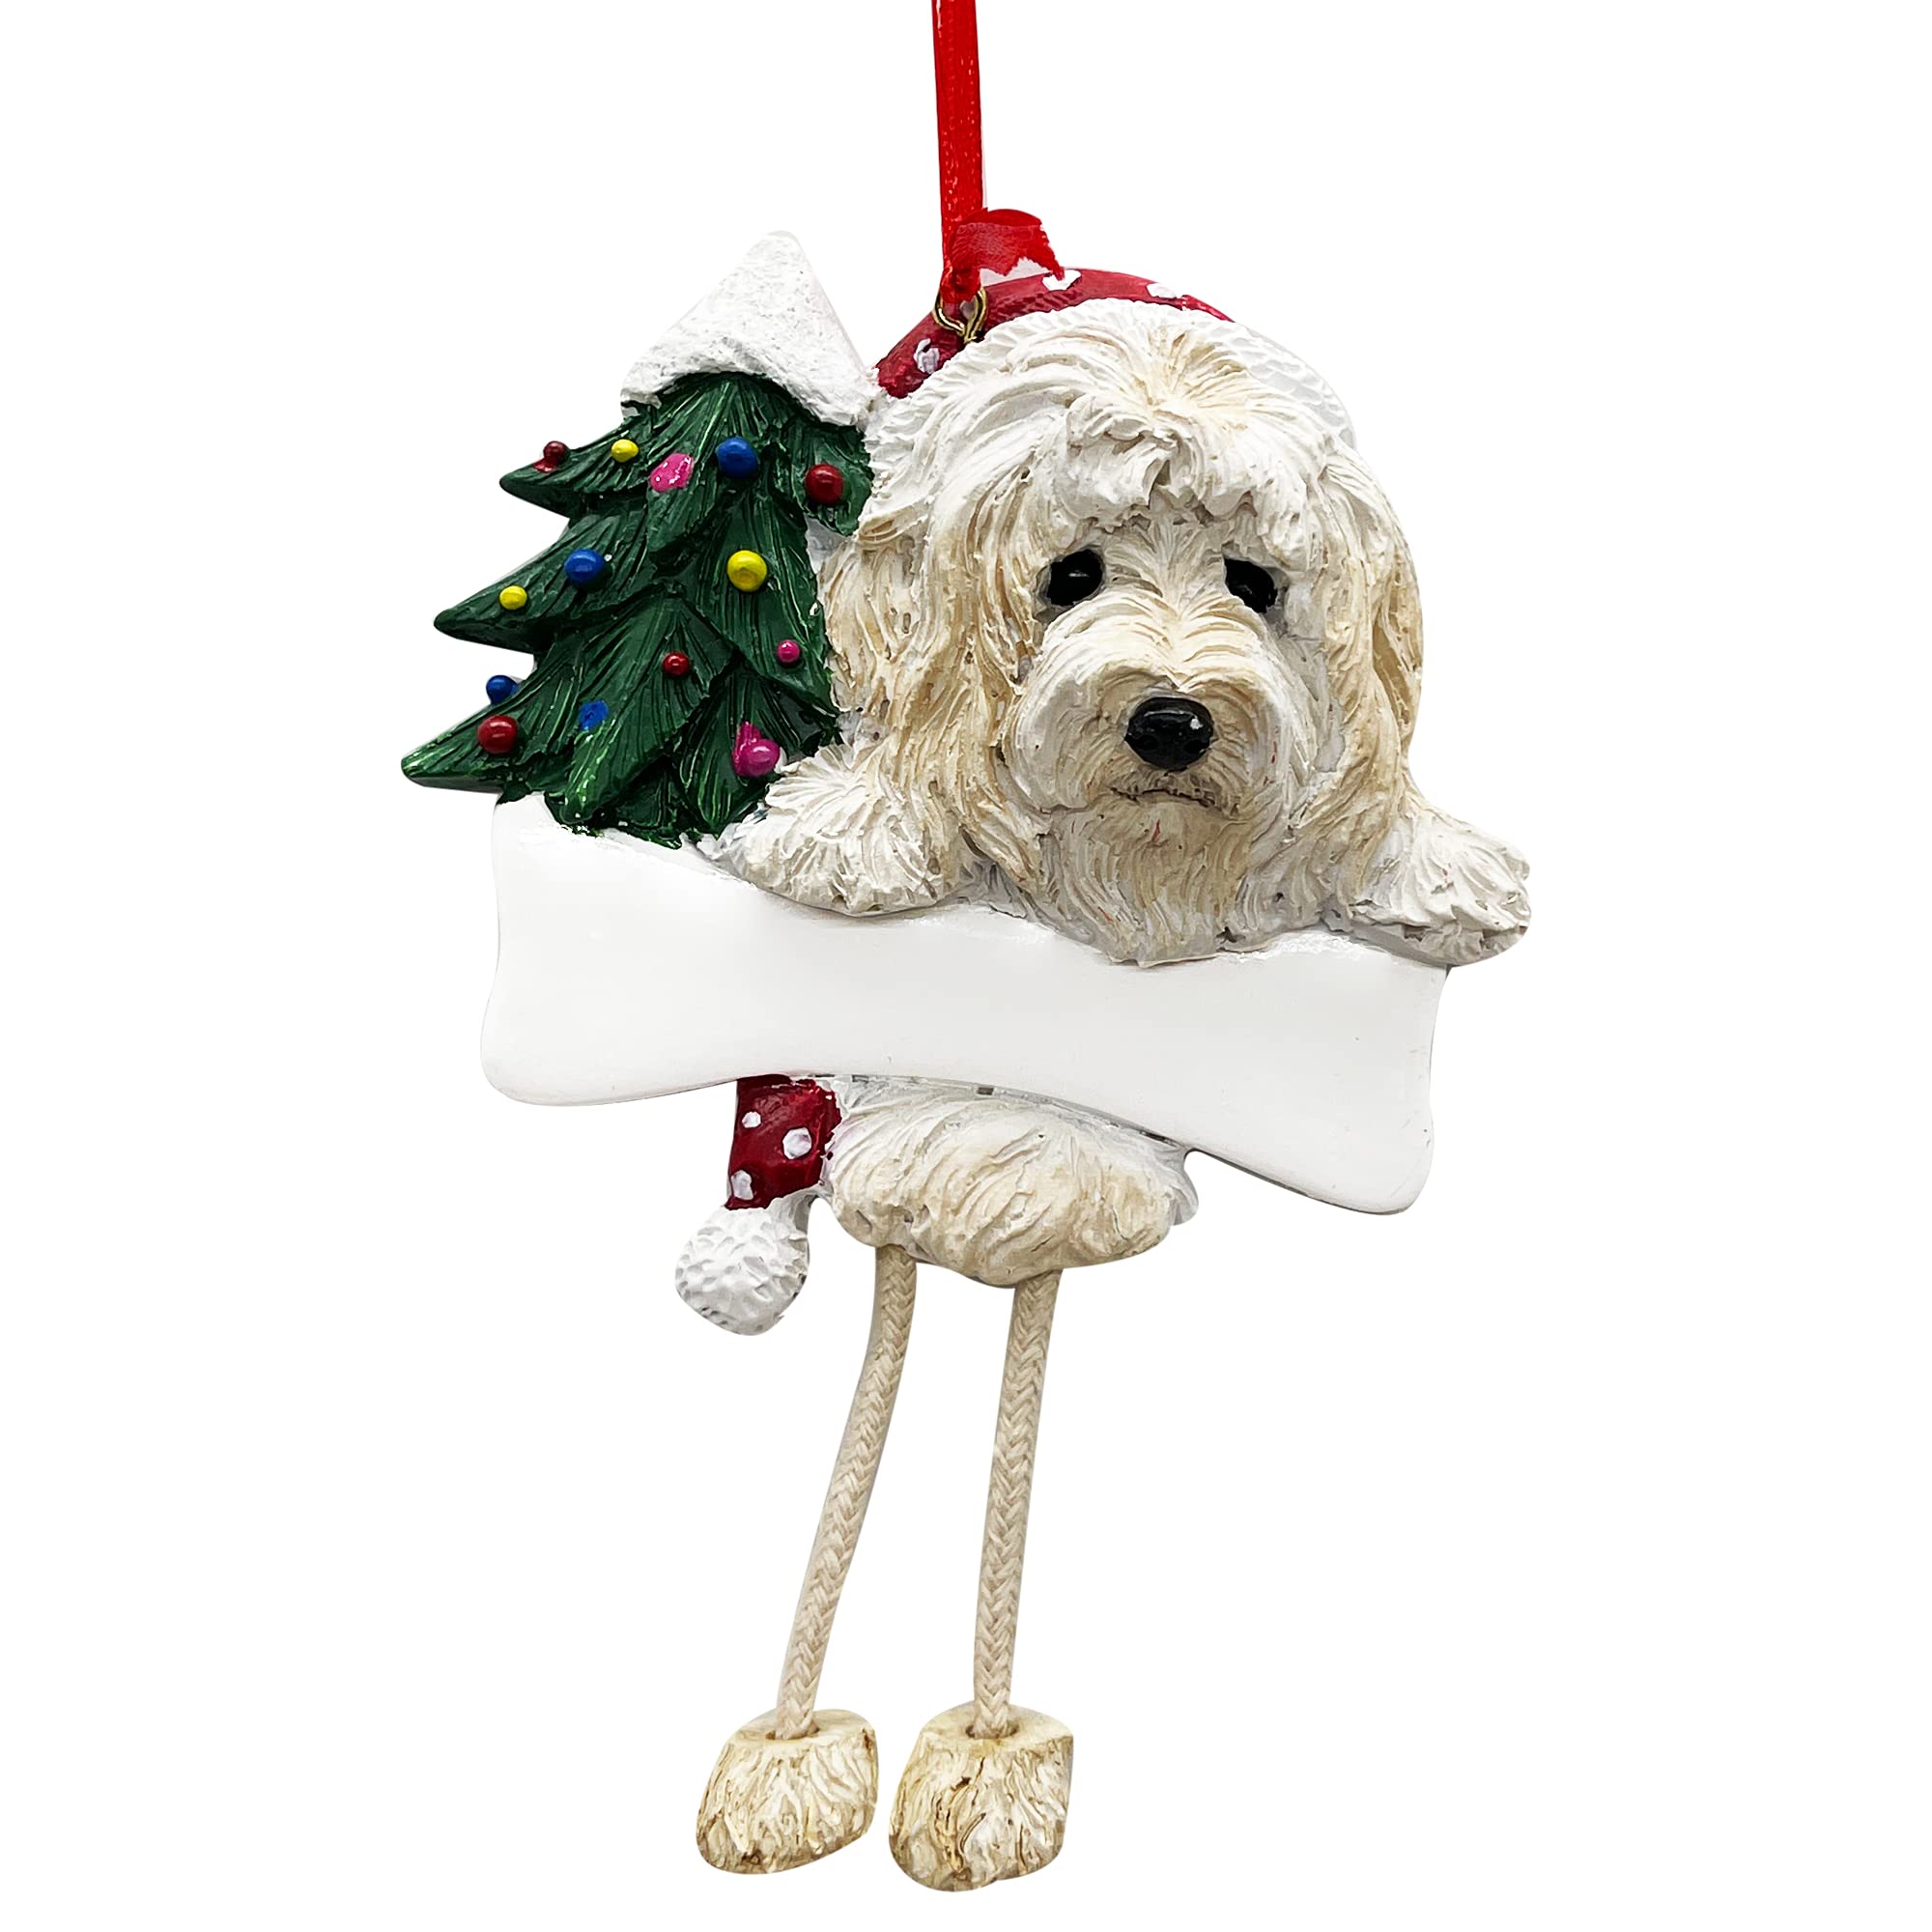 Goldendoodle Ornament with Unique "Dangling Legs" Hand Painted and Easily Personalized Christmas Ornament